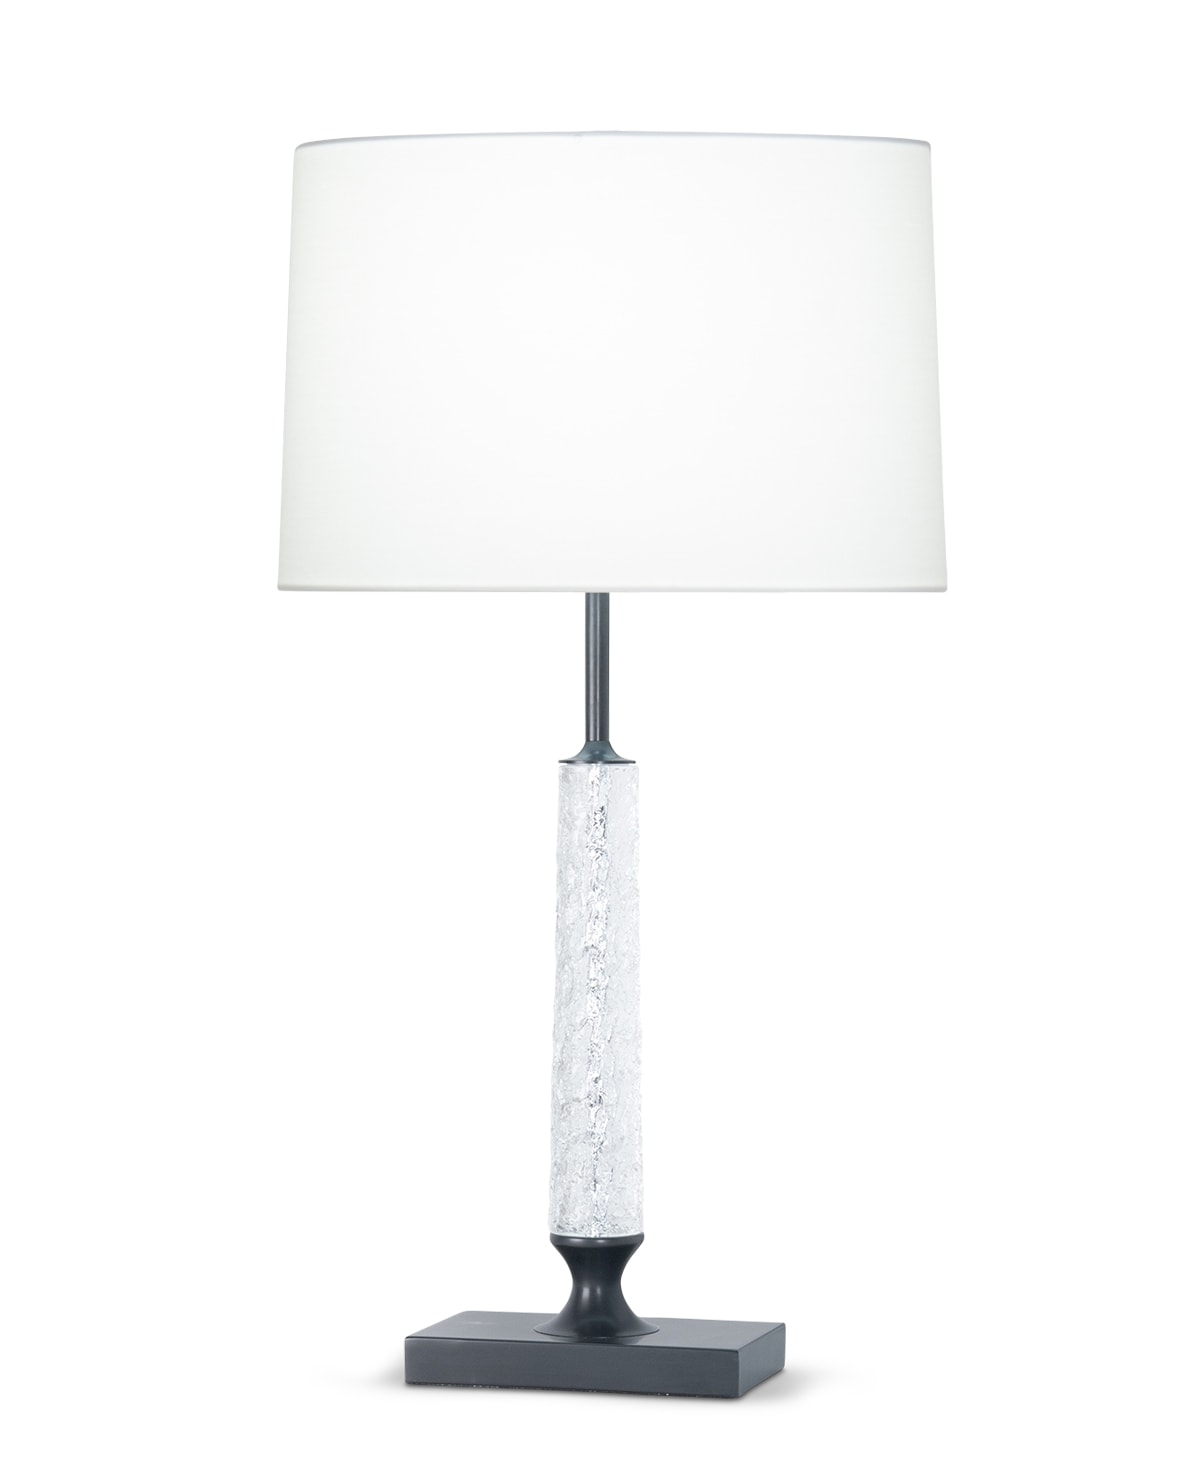 FlowDecor Hazel Table Lamp in metal with gunmetal finish and crystal and off-white cotton oval shade (# 4554)